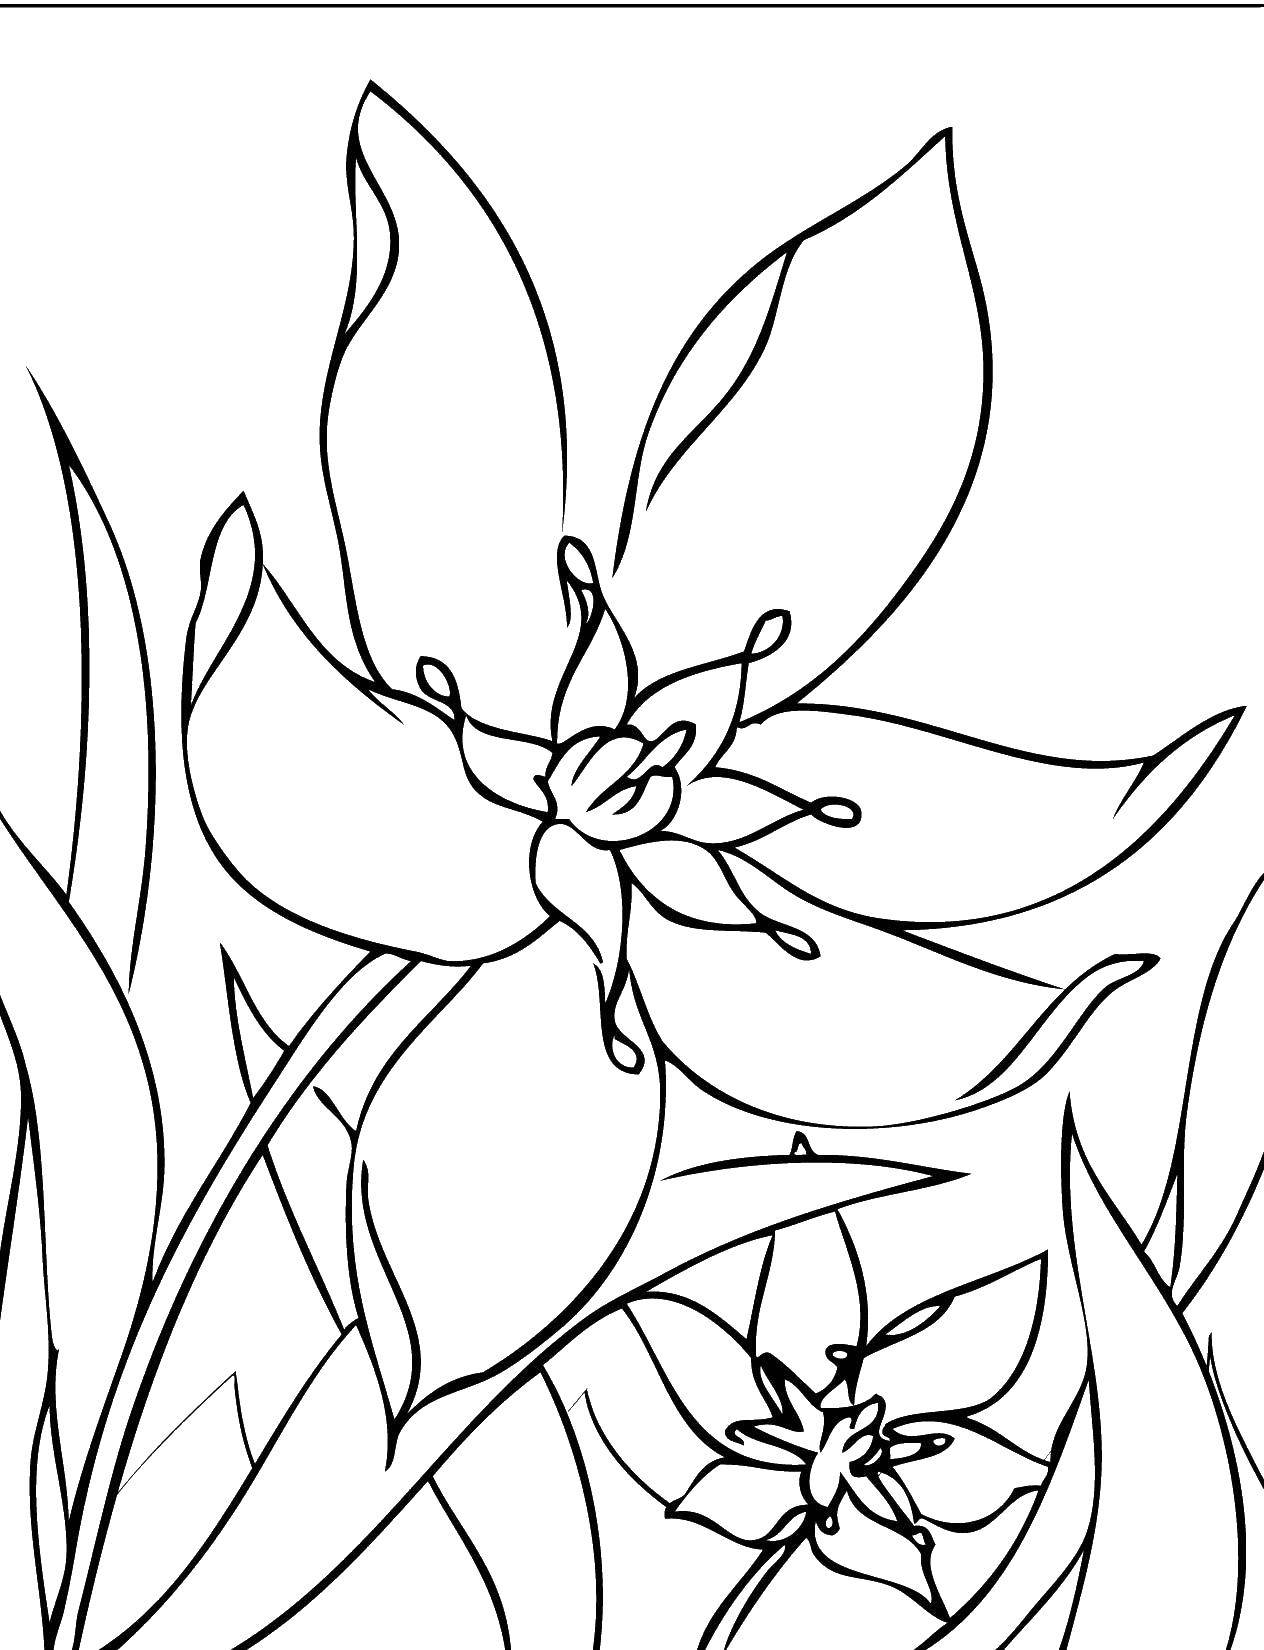 Coloring Flowers. Category spring. Tags:  flowers.